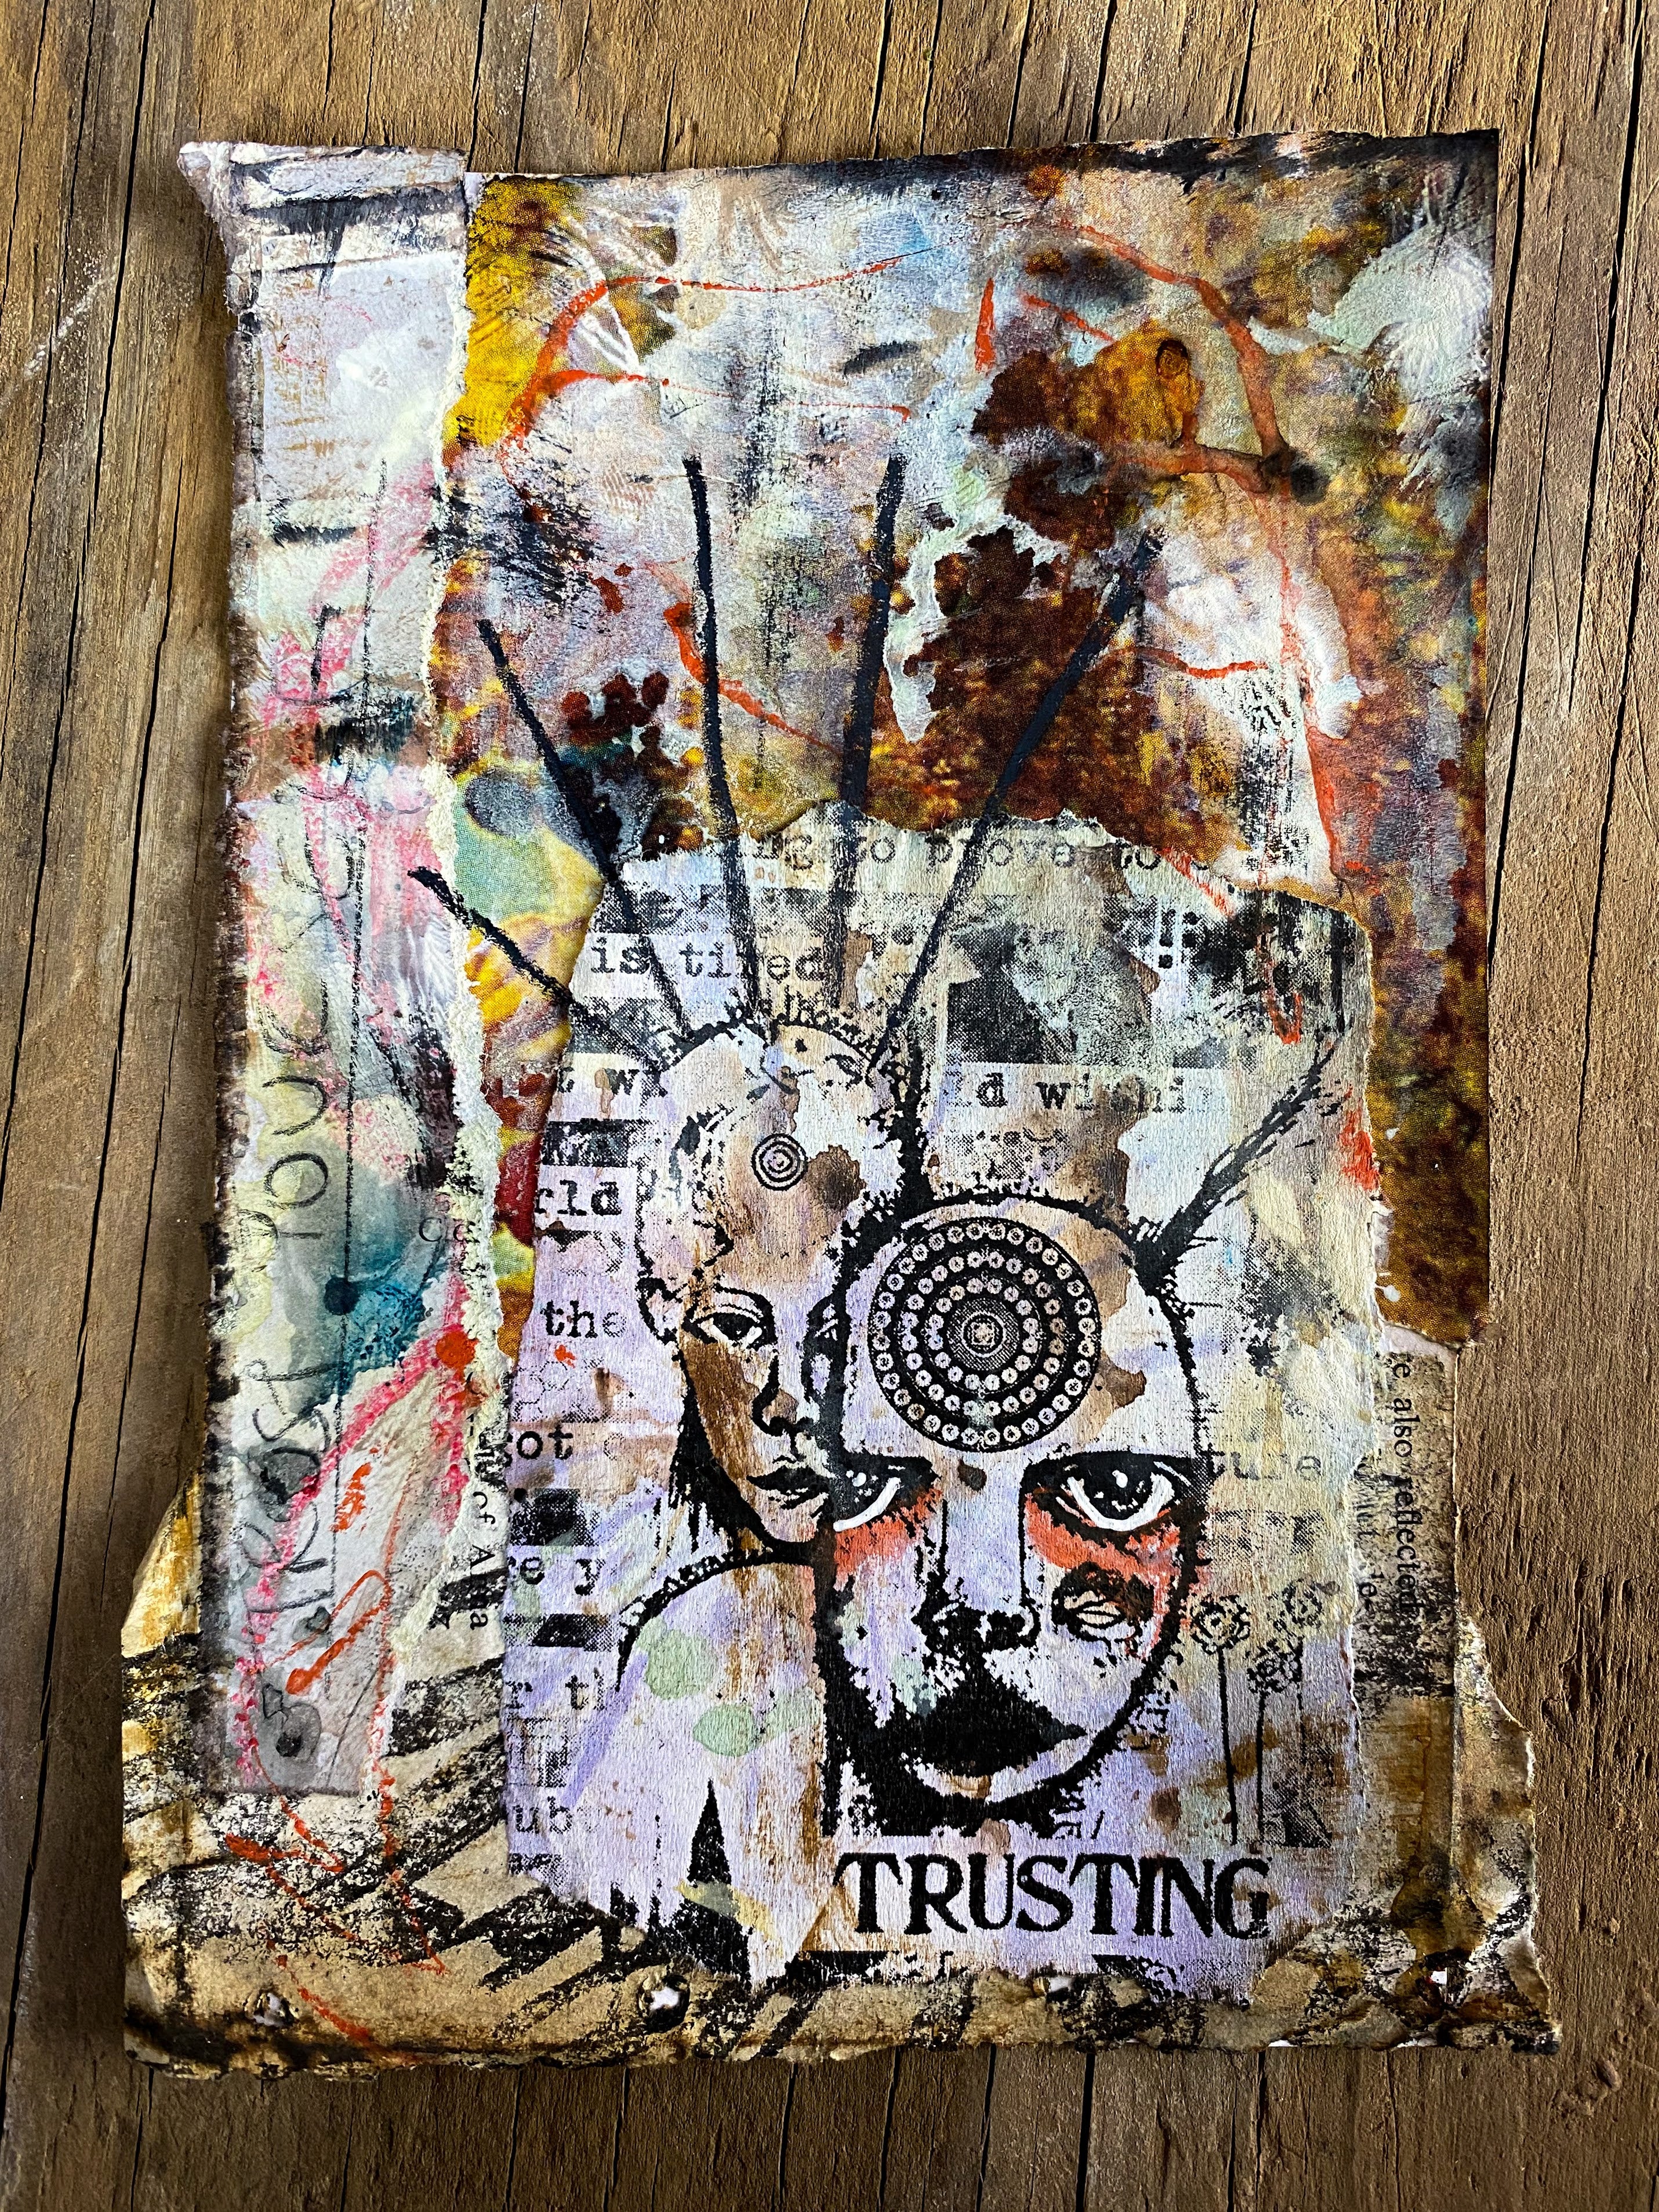 Trusting Herself - Original Mixed Media Collage